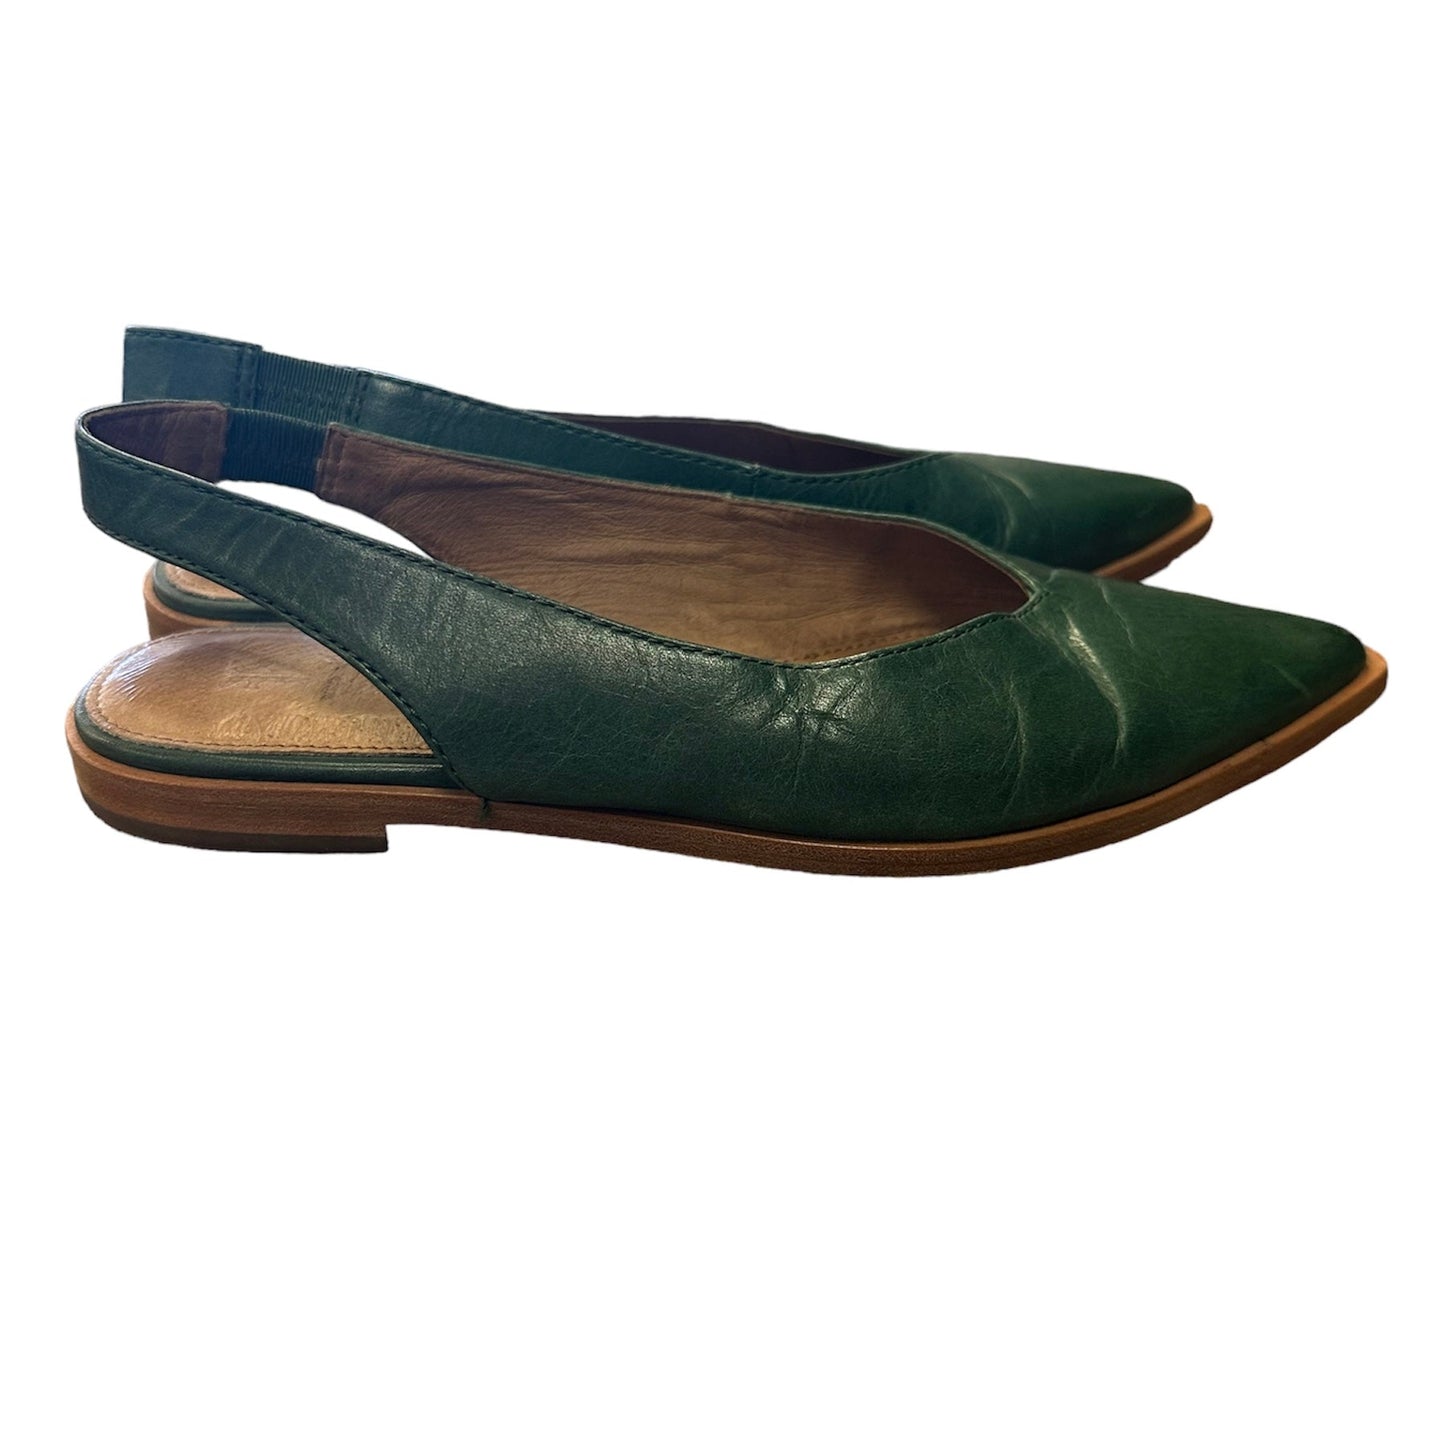 Shoes Flats By Frye  Size: 7